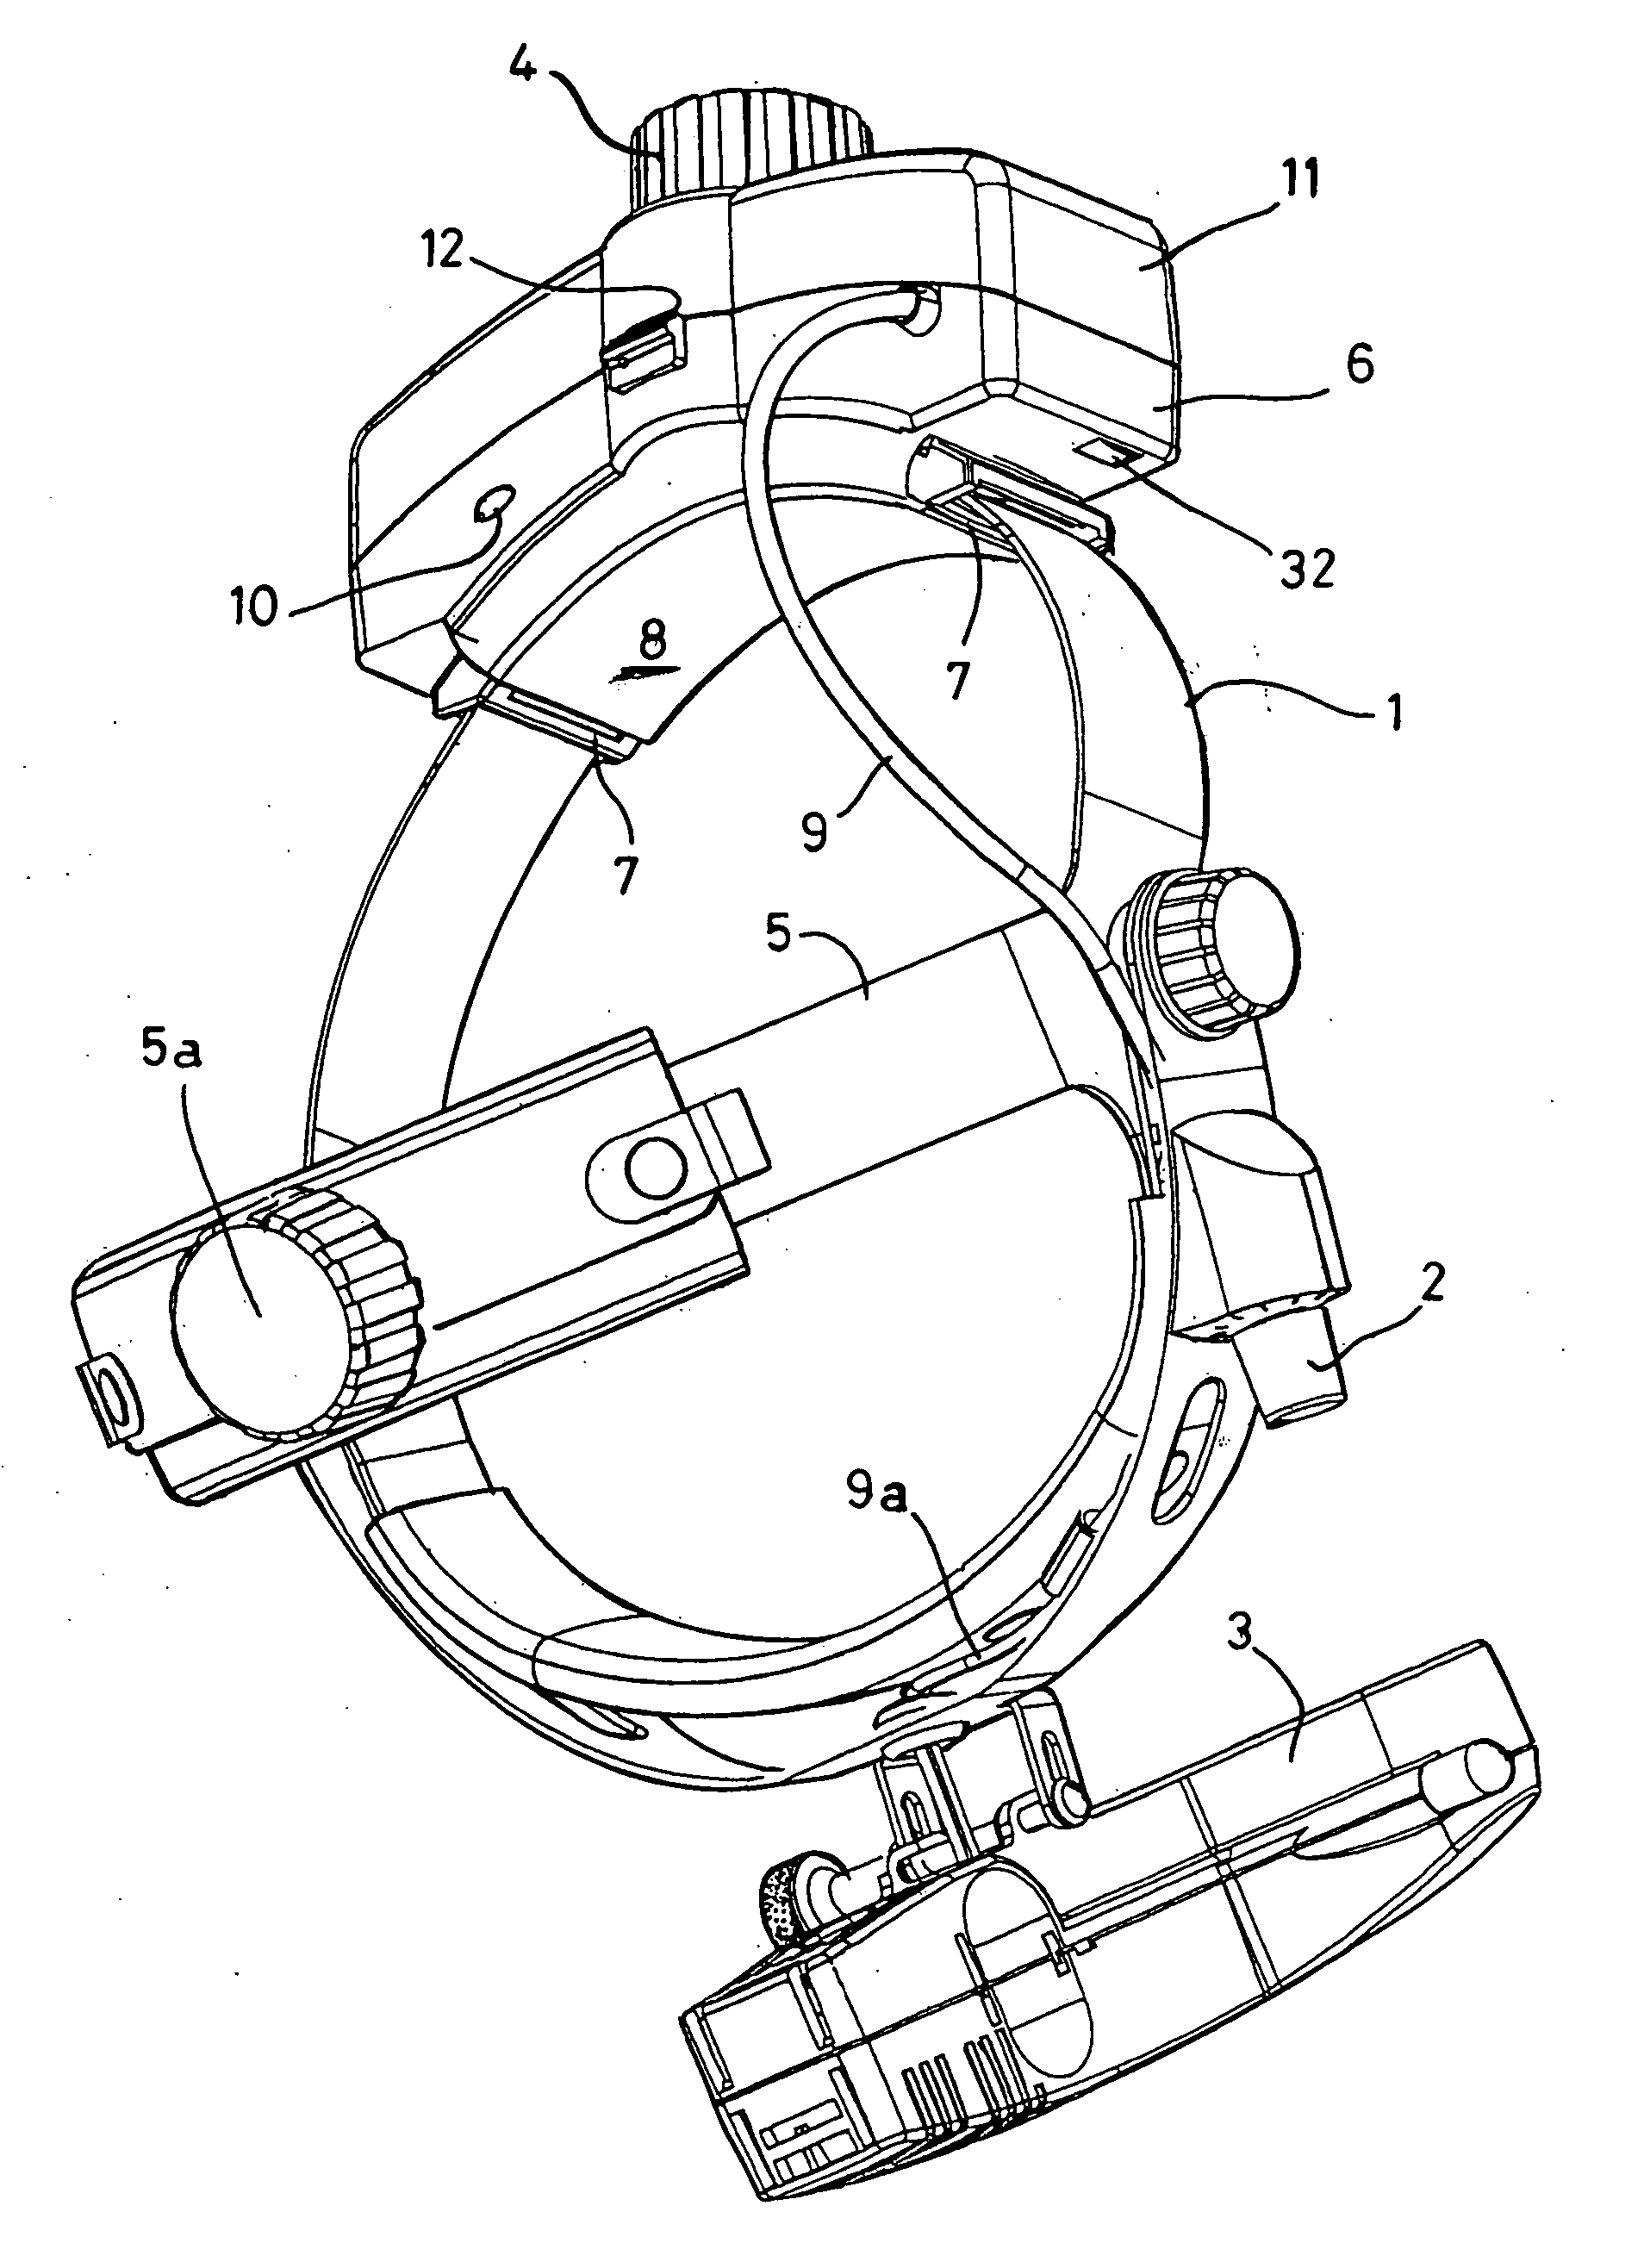 Head-mounted instruments